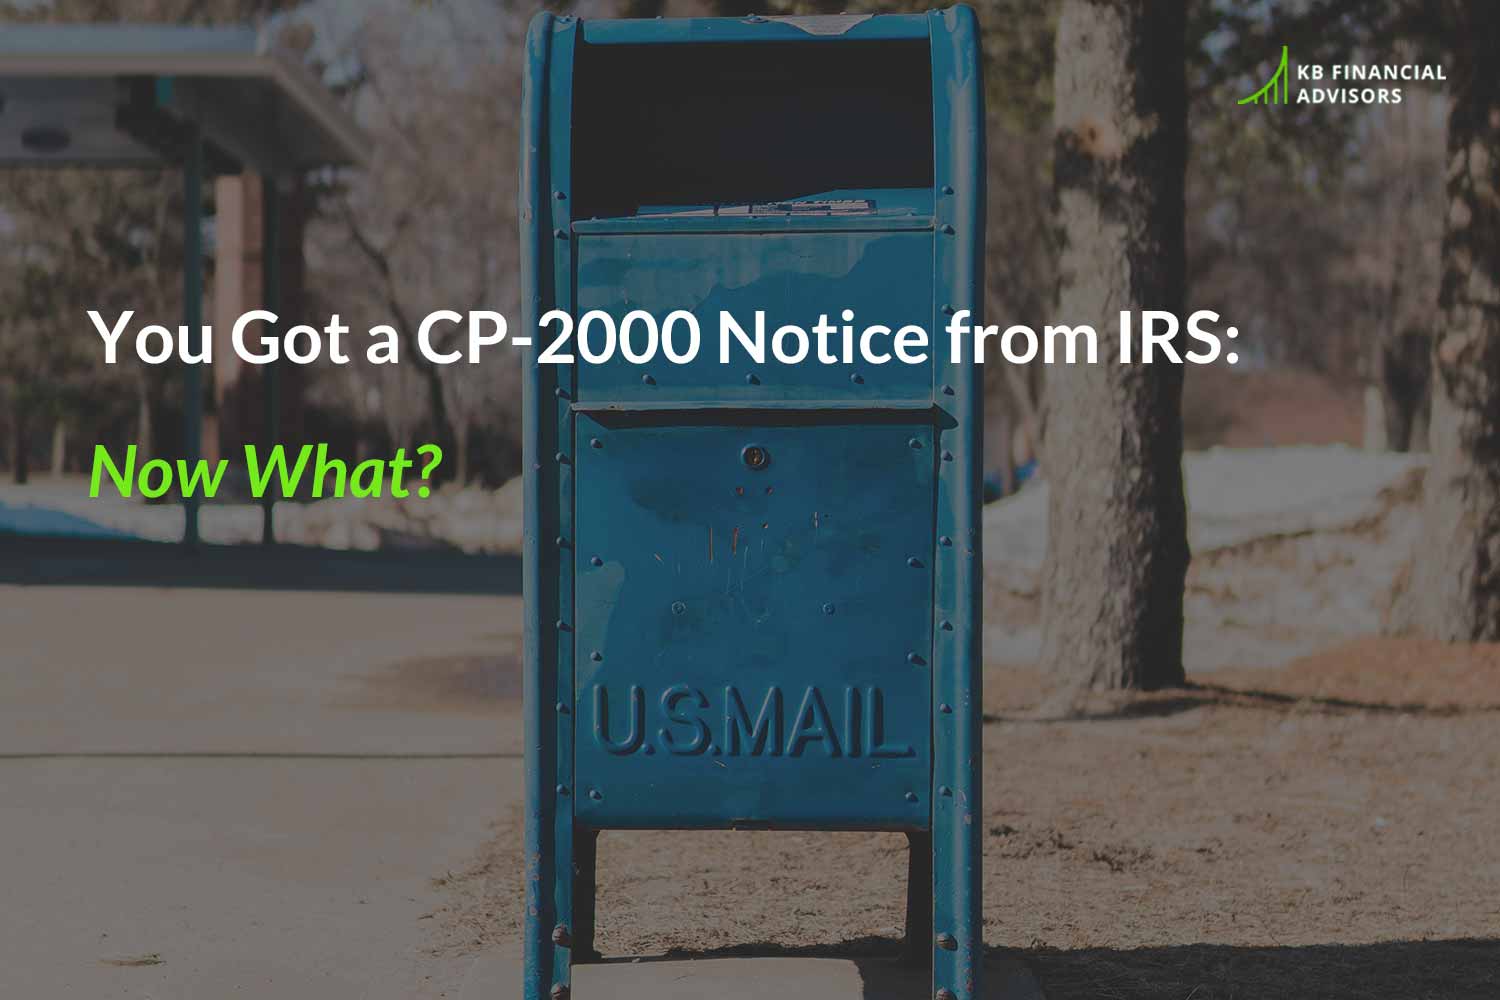 cp2000 notice from irs